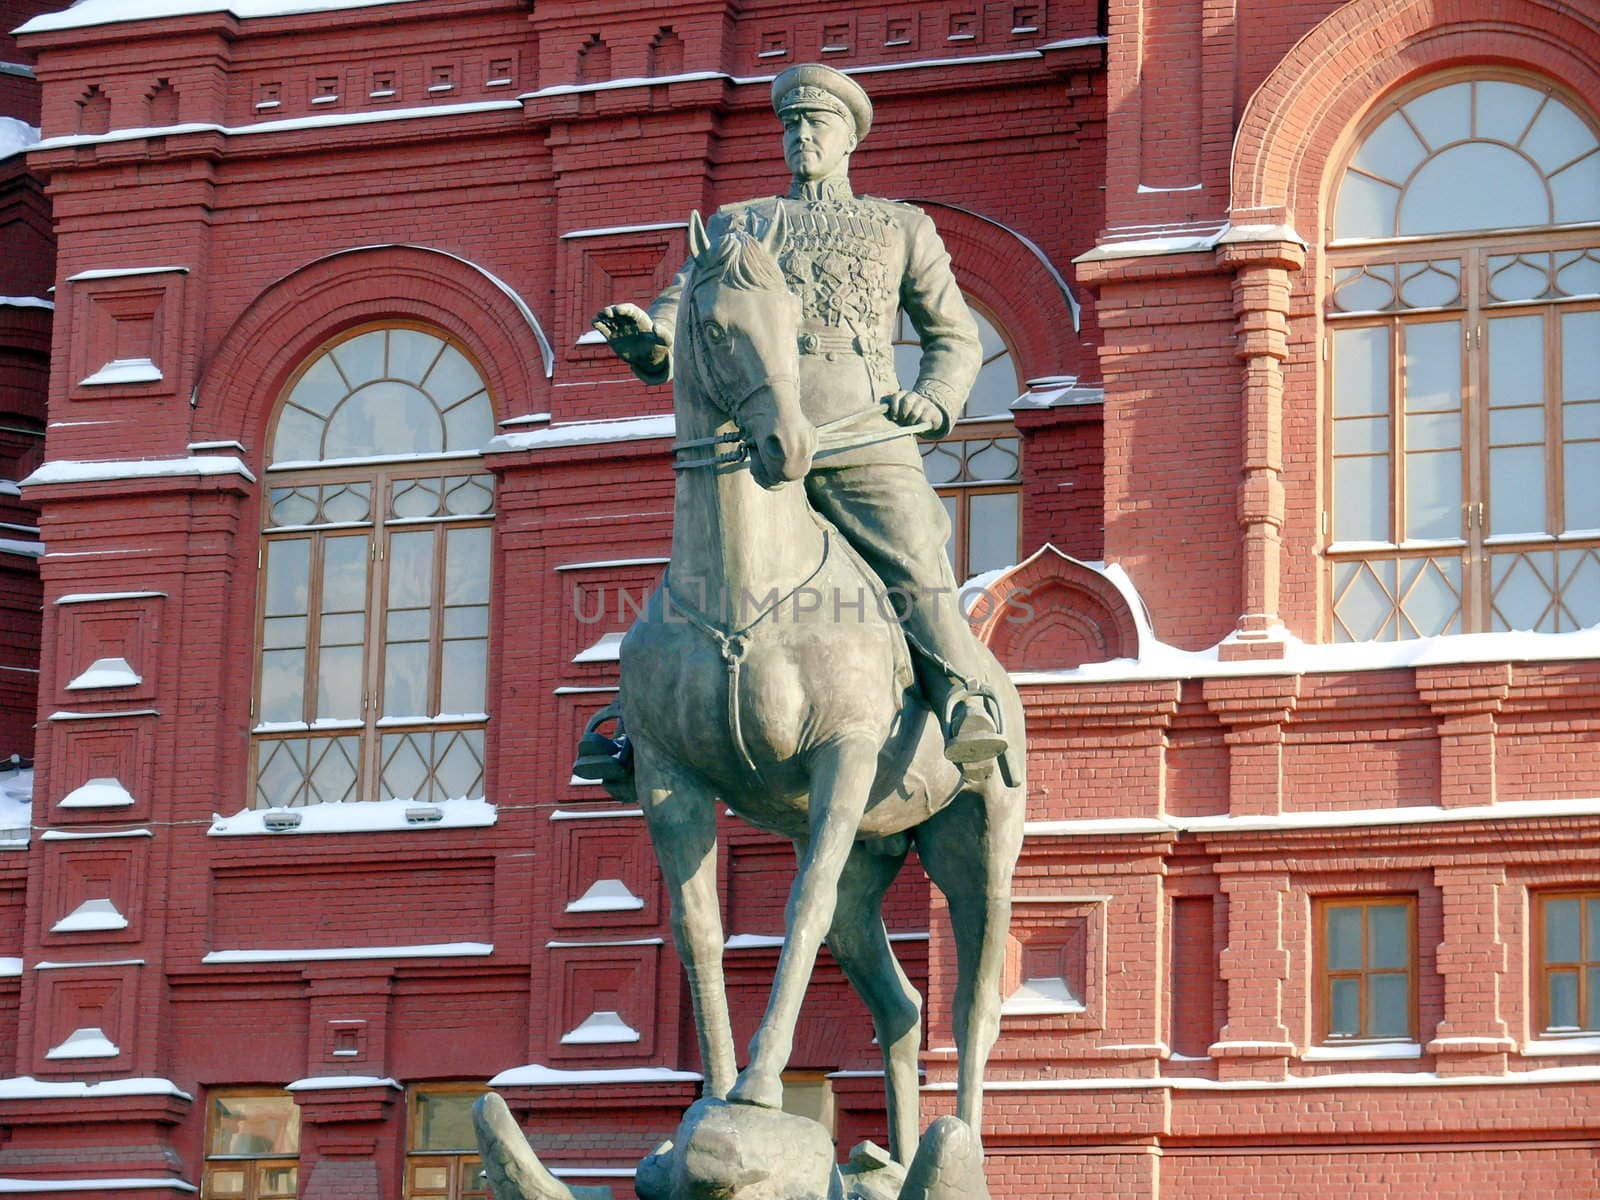 Zhukov monument near National historic musium in Moscow, Russia